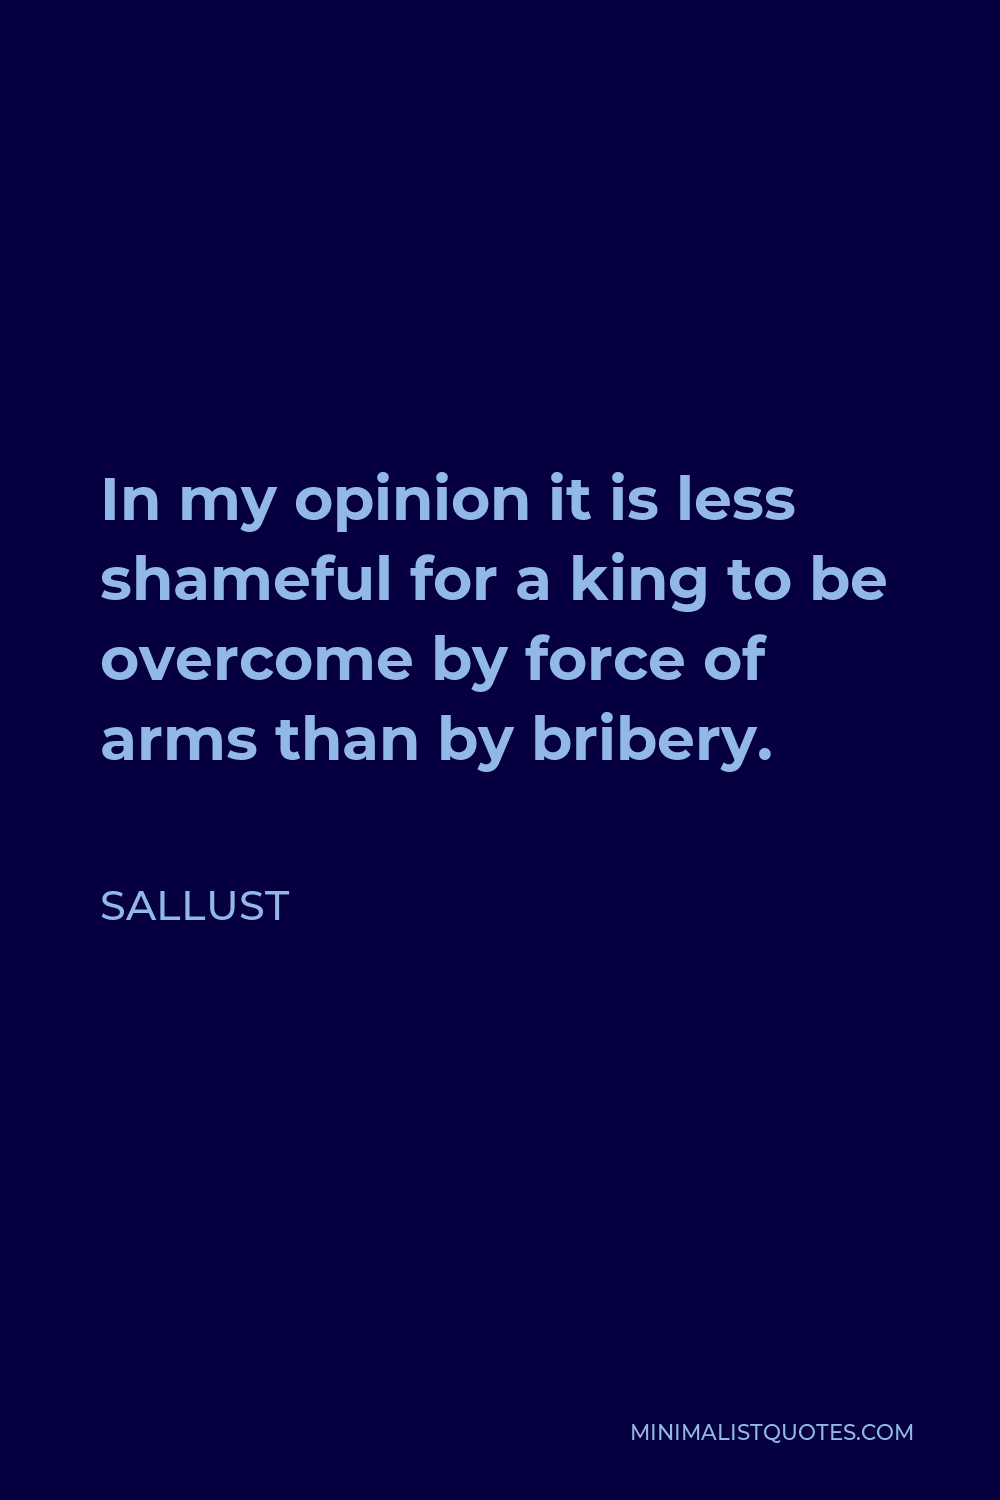 Sallust Quote - In my opinion it is less shameful for a king to be overcome by force of arms than by bribery.